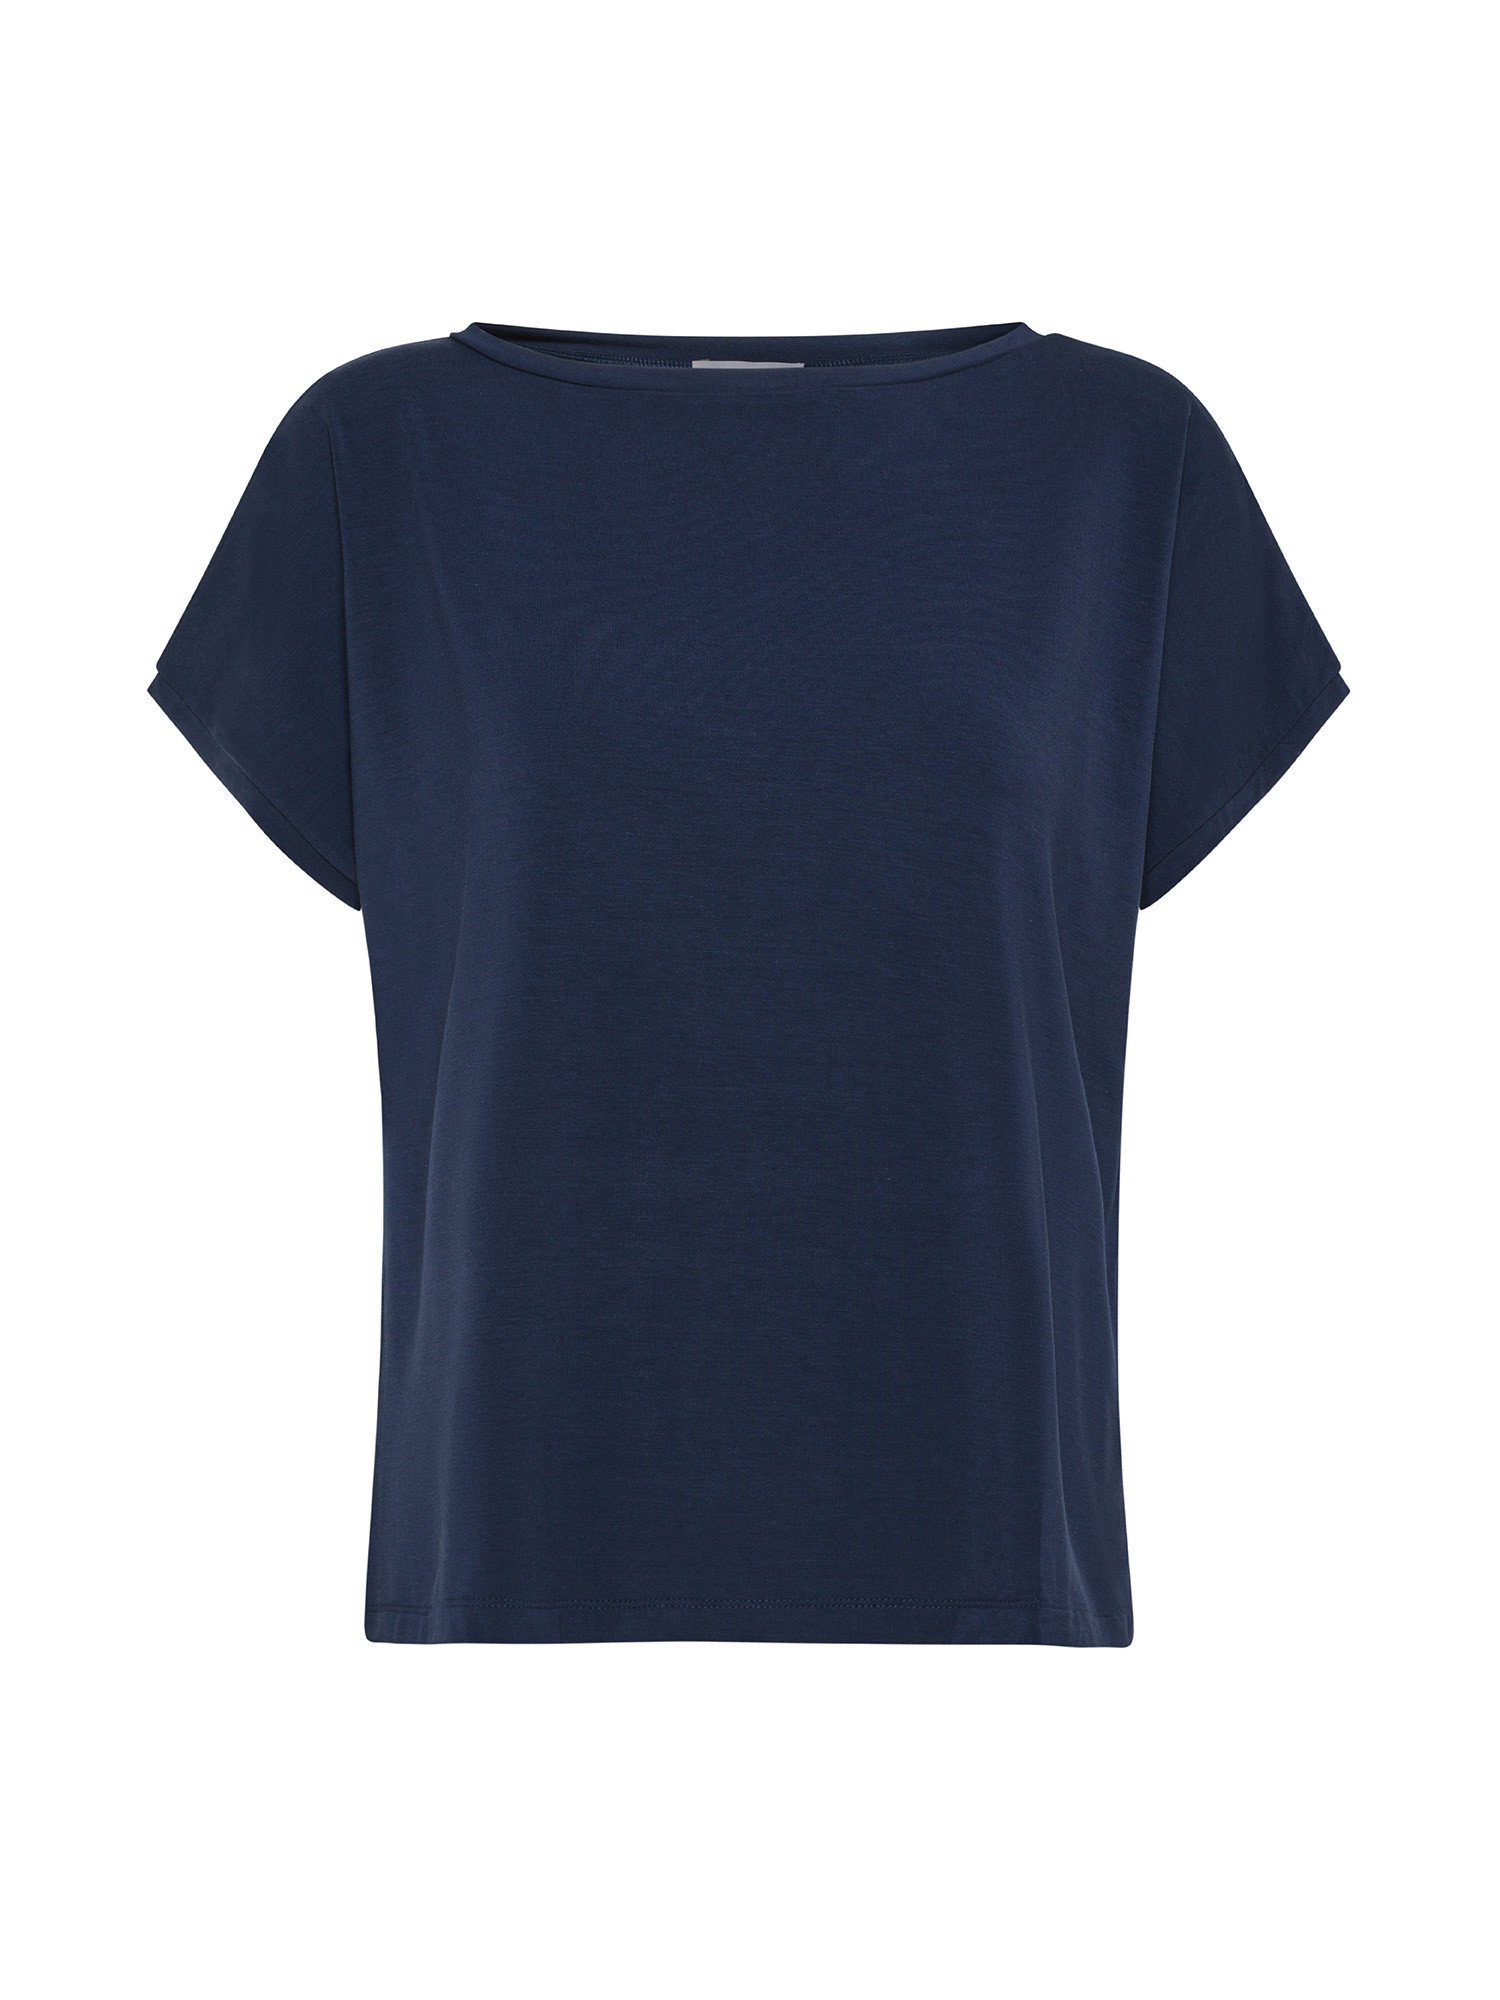 T-shirt in viscosa di bamboo, Blue Navy, large image number 0